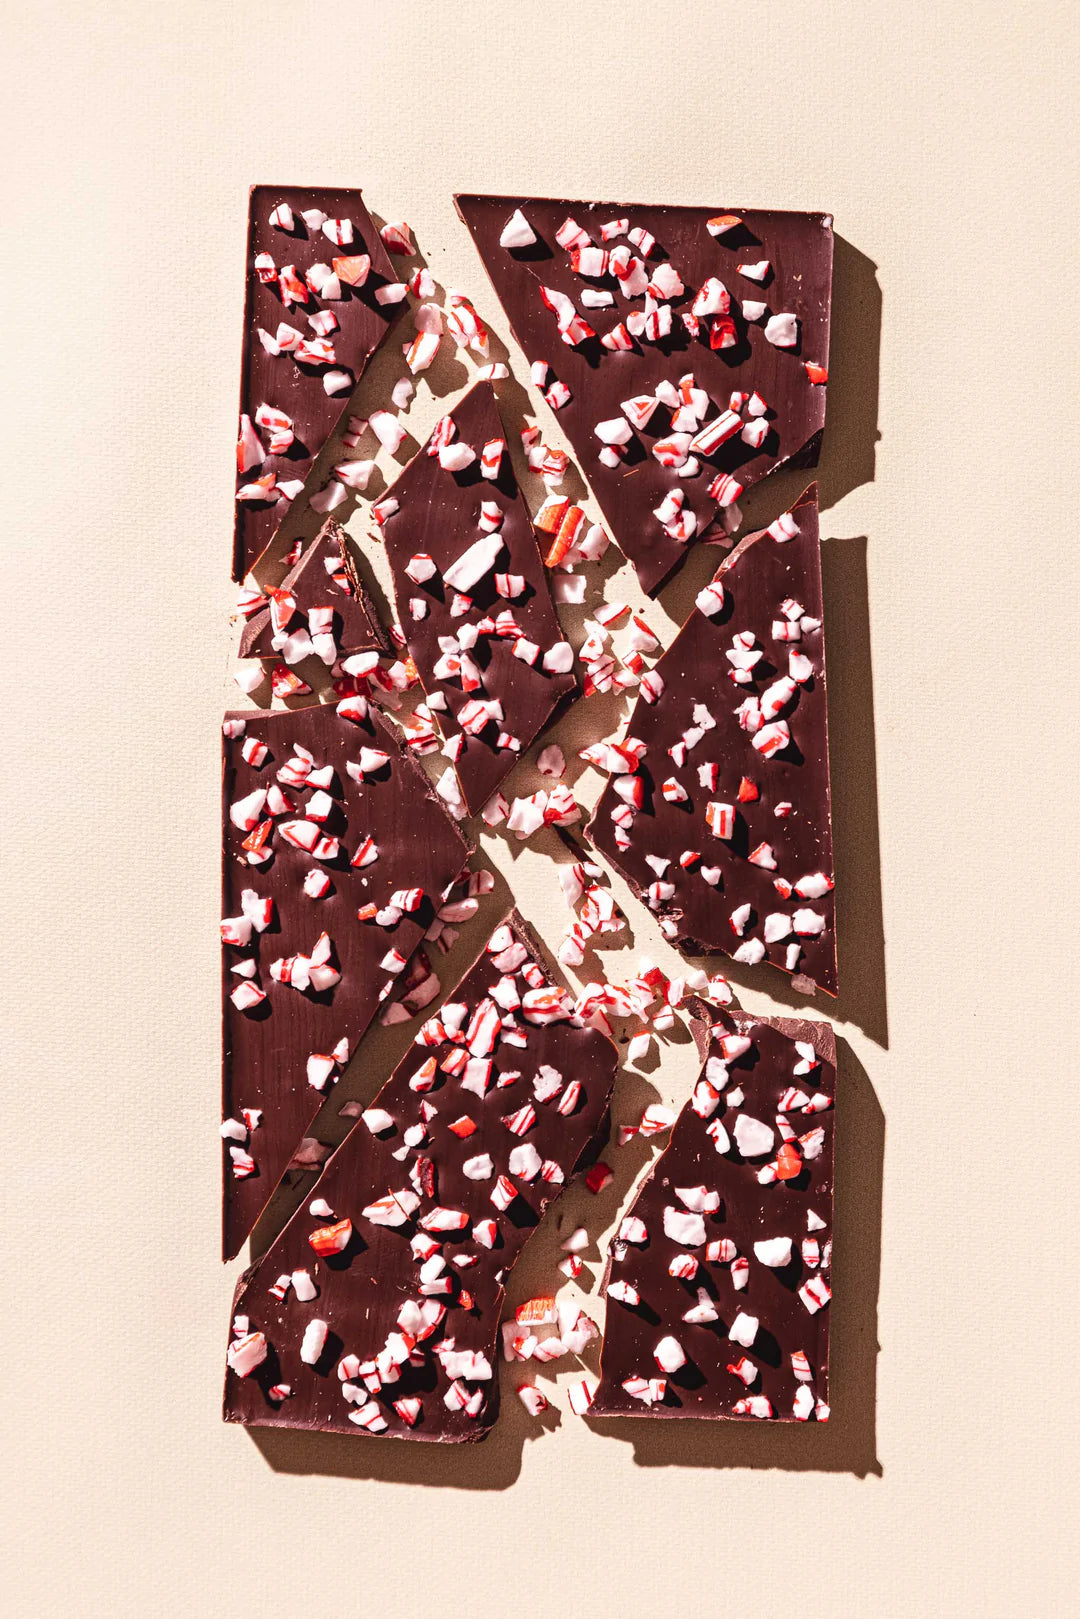 Peppermint Bark Compartes